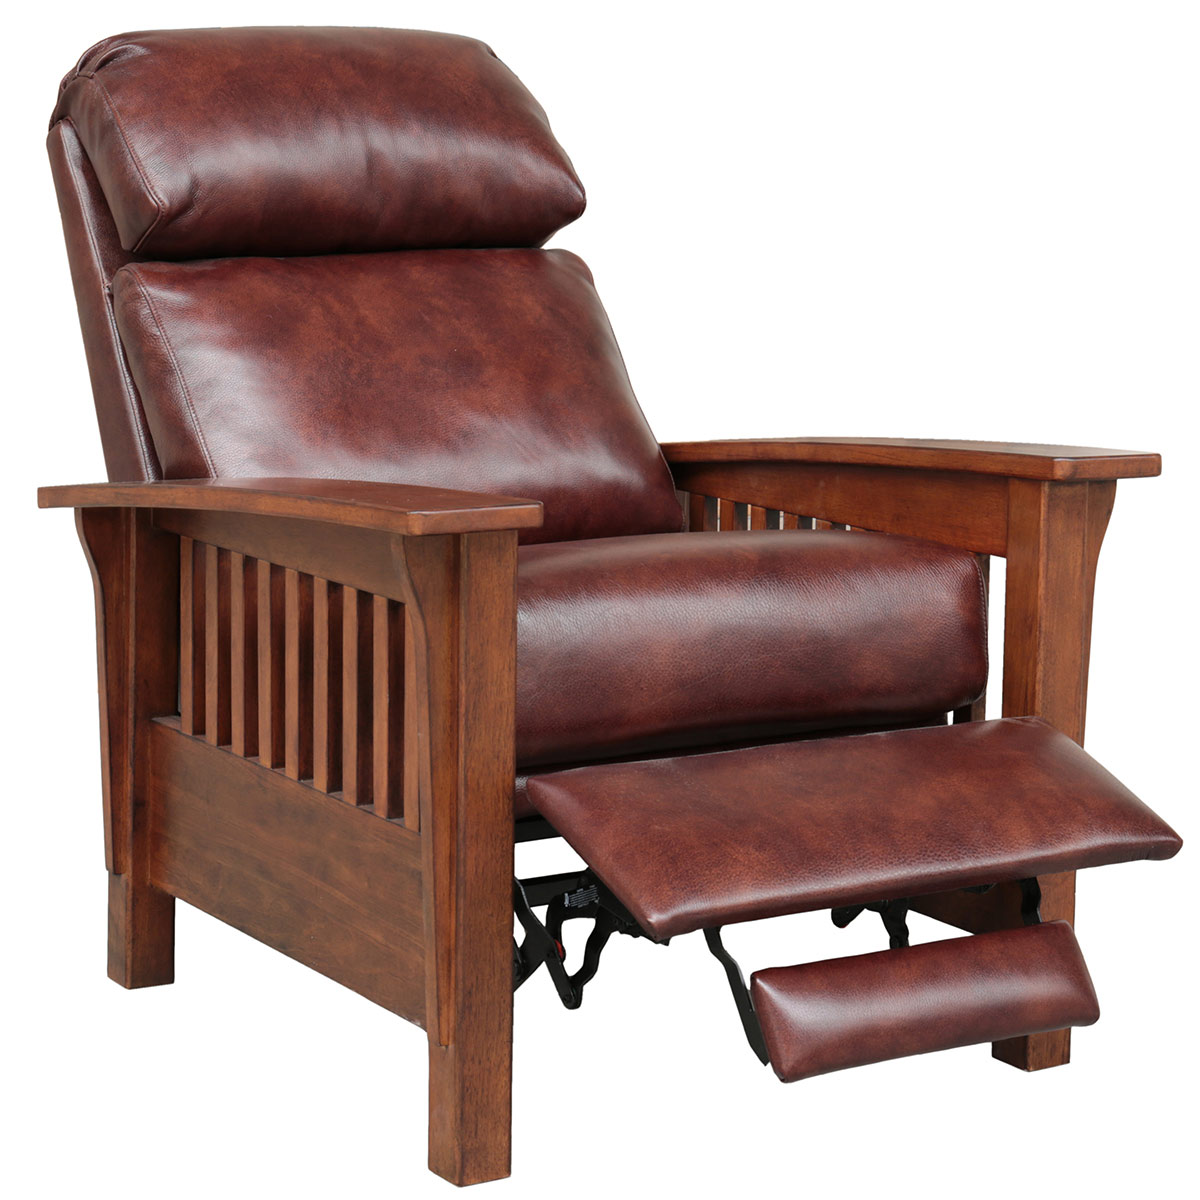 Barcalounger Mission Recliner Chair - Wenlock Fudge/All Leather